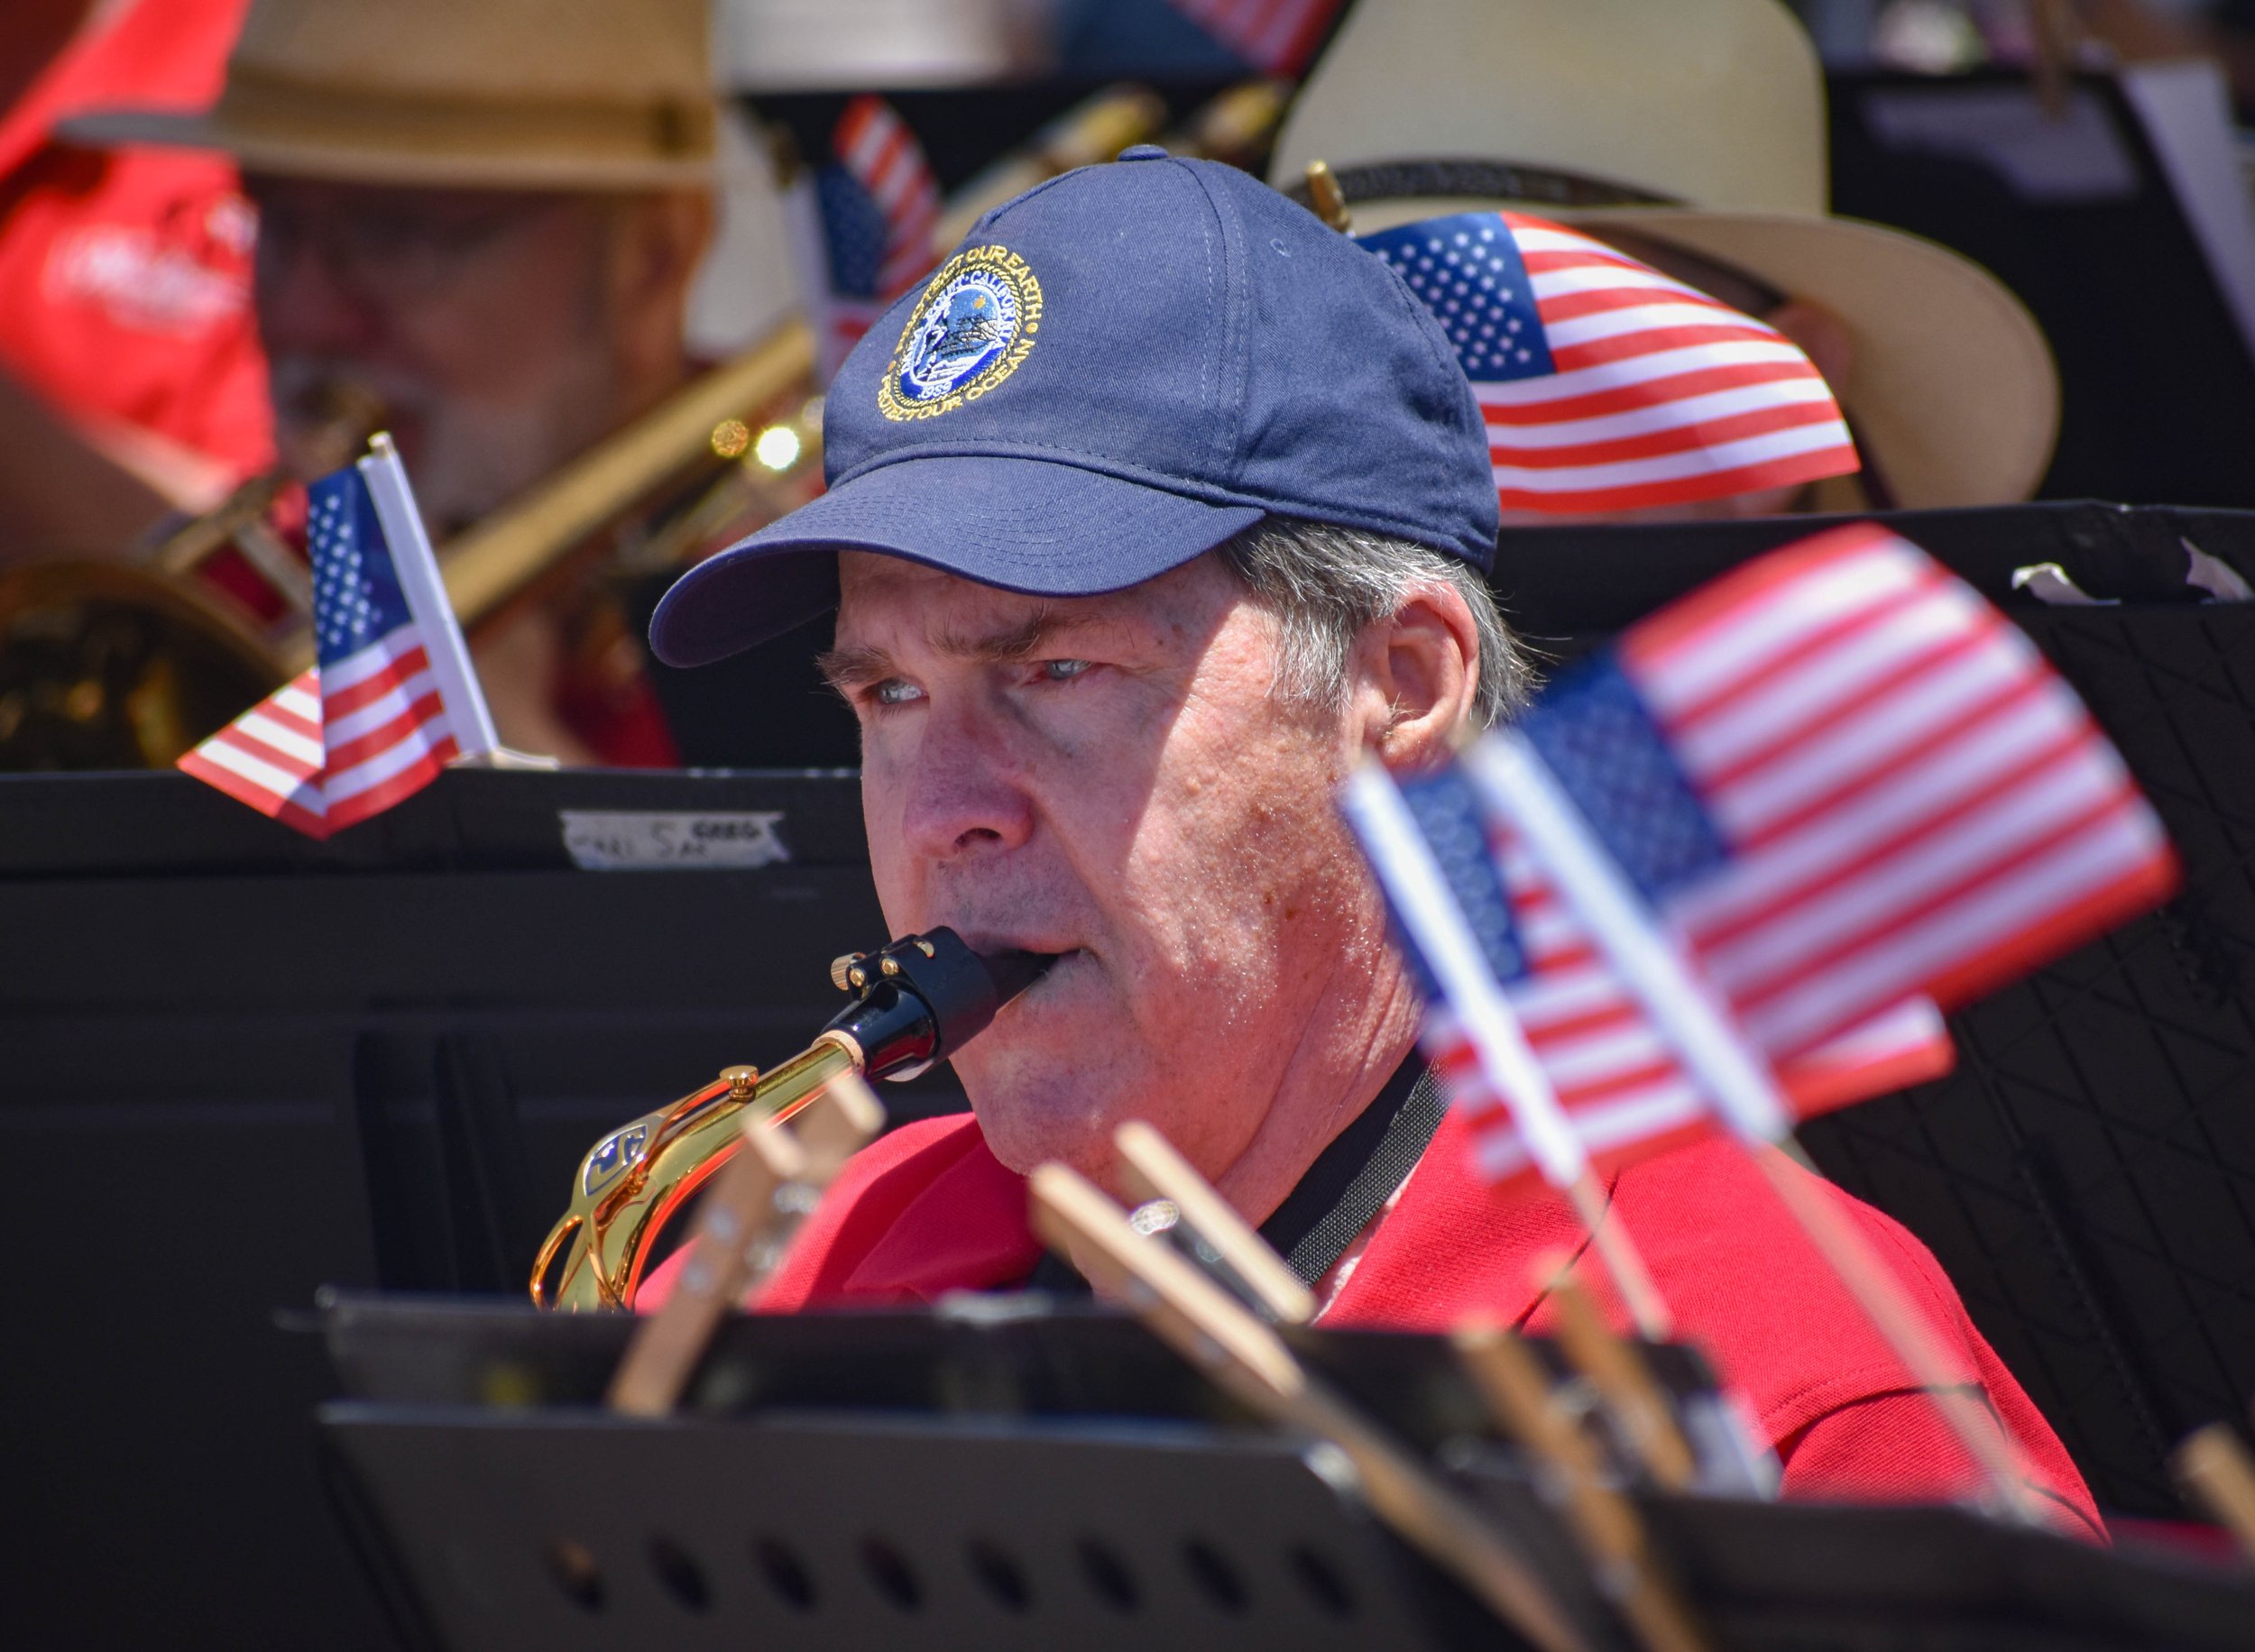 05-30-2022 LCCB Memorial Day Concert by Peyton Webster37-29.jpg